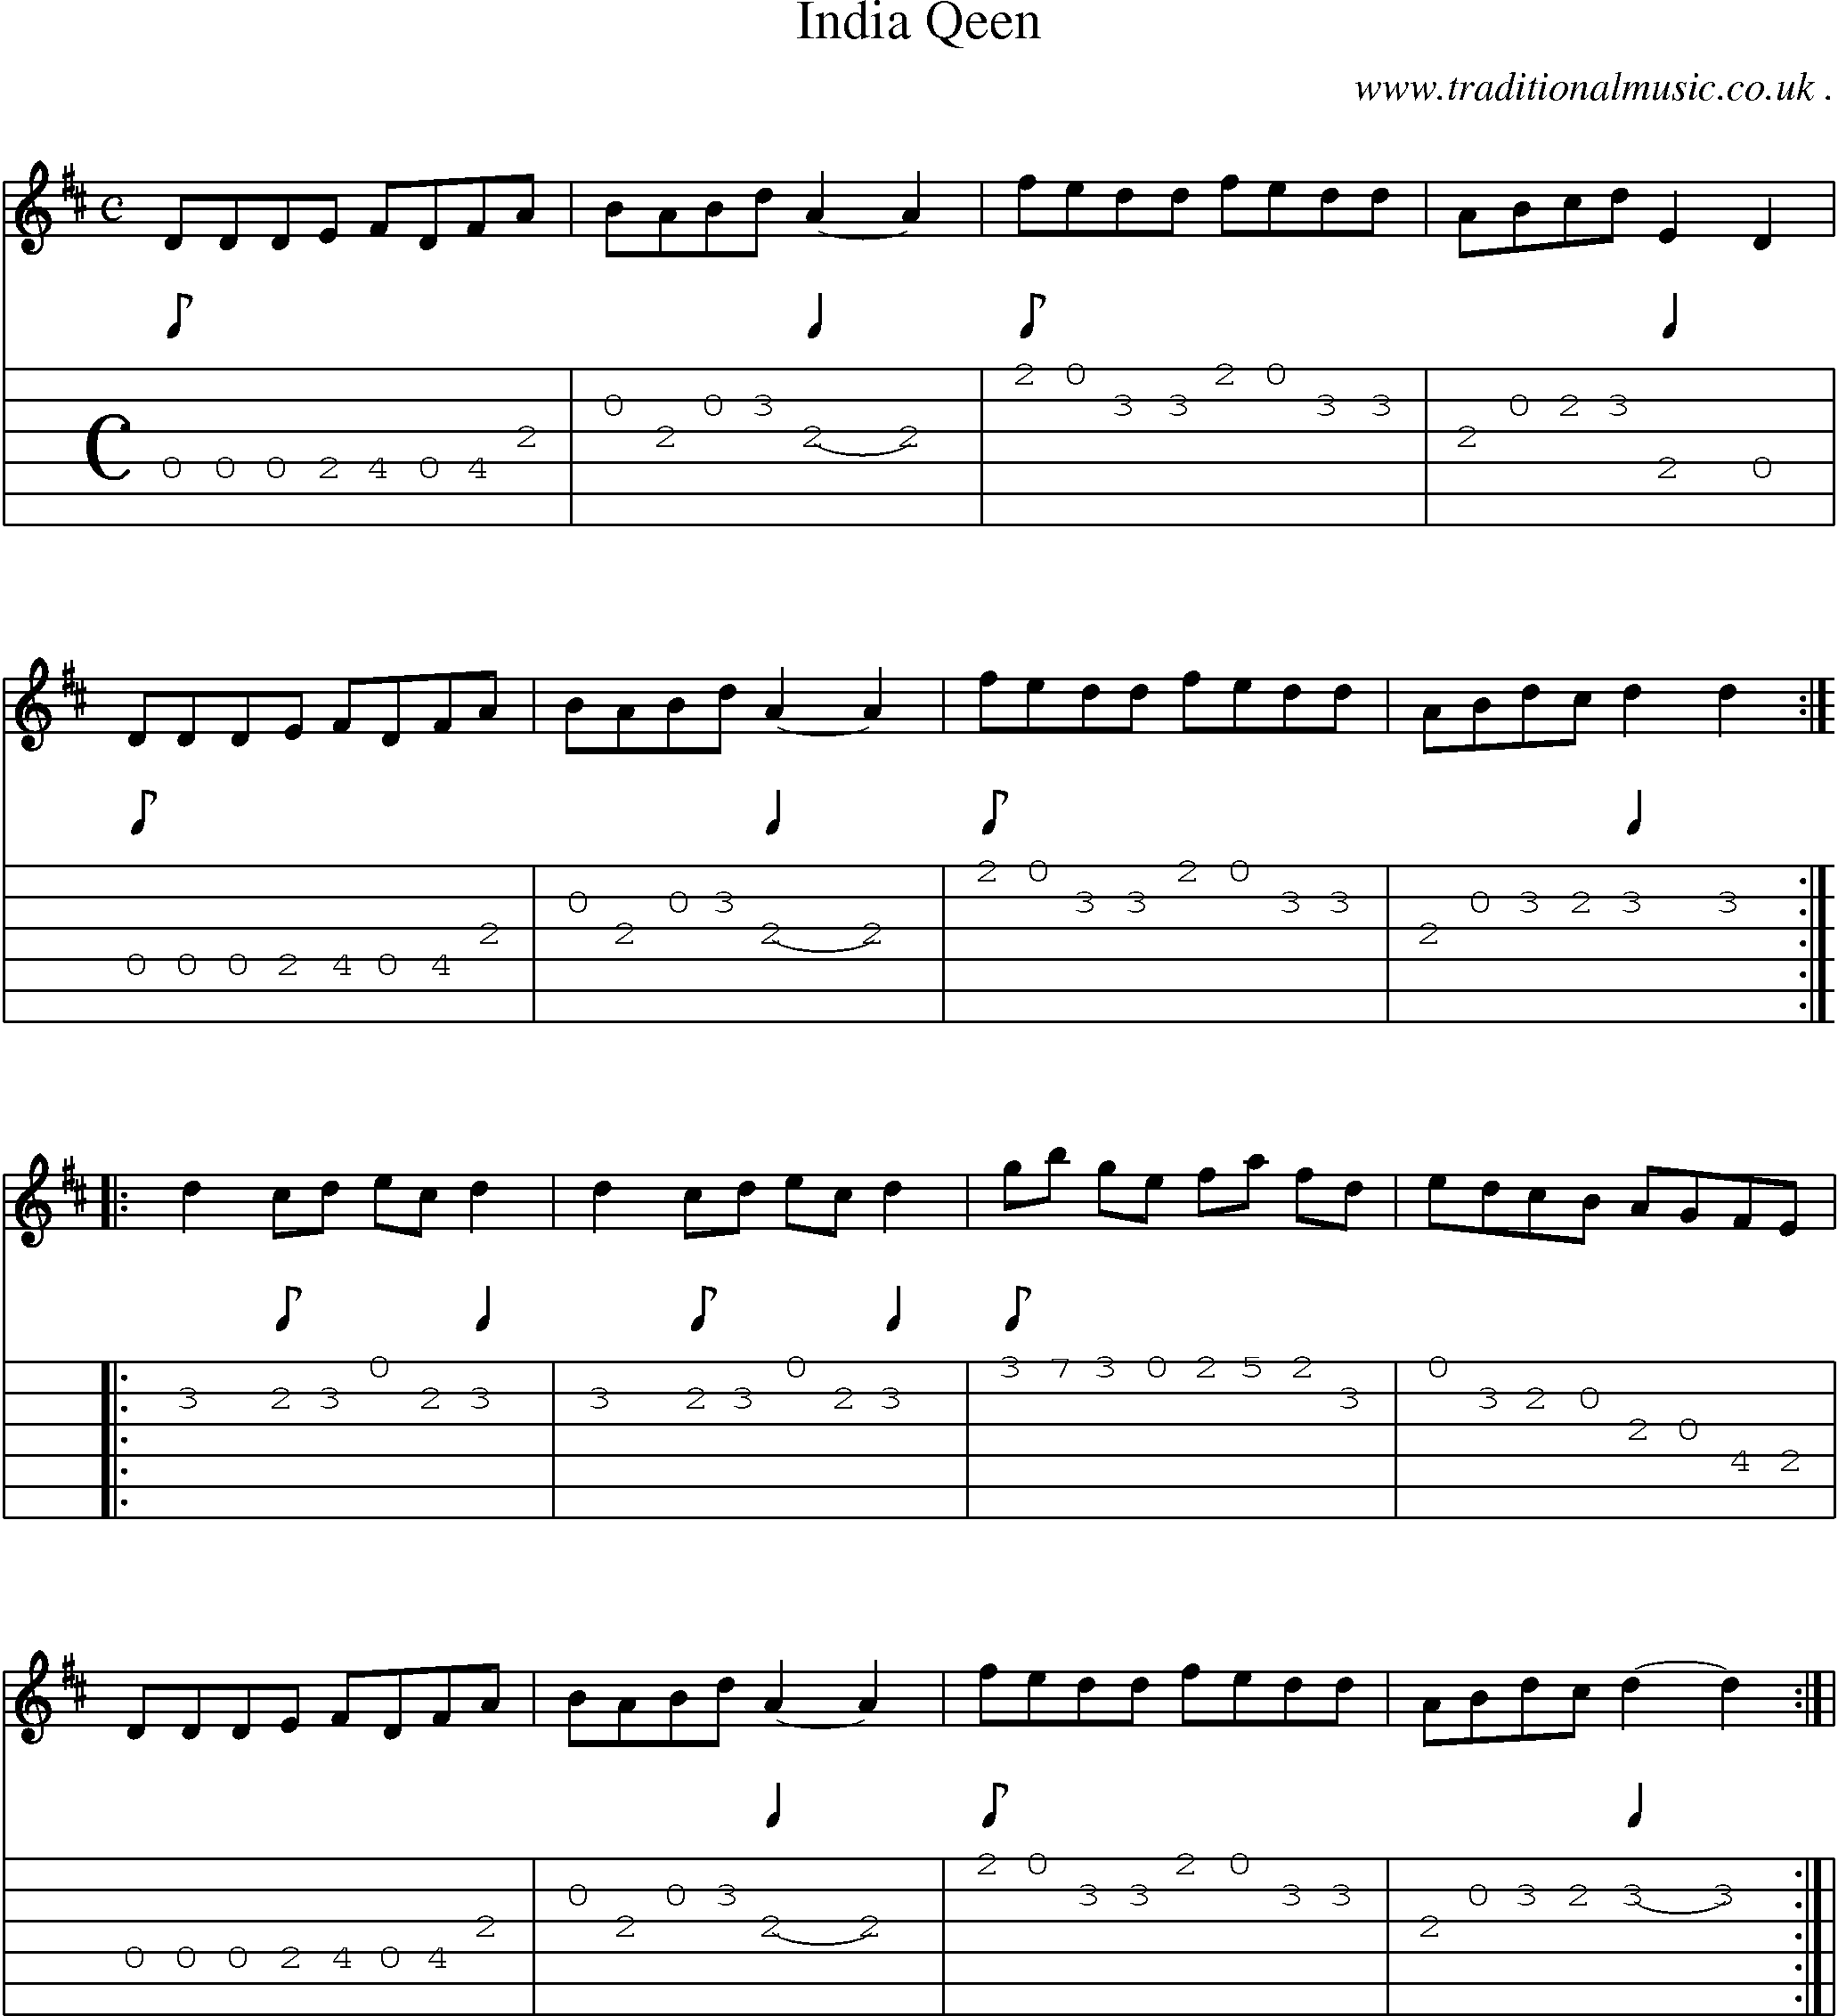 Sheet-Music and Guitar Tabs for India Qeen